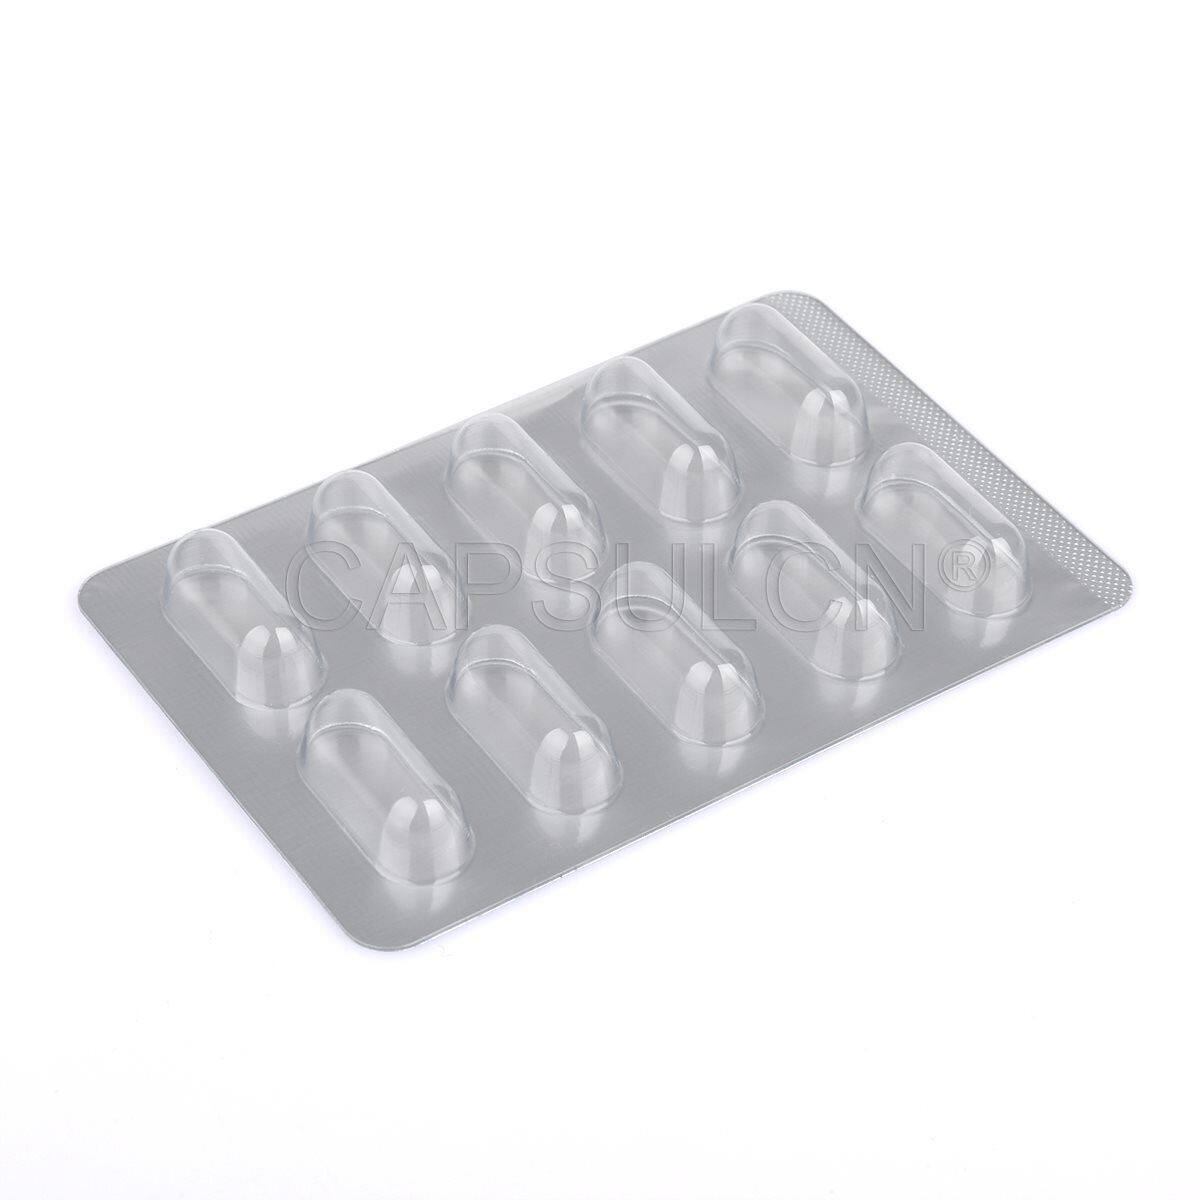 Capsule Blister Packing Sheet with 10 holes - IPharmachine